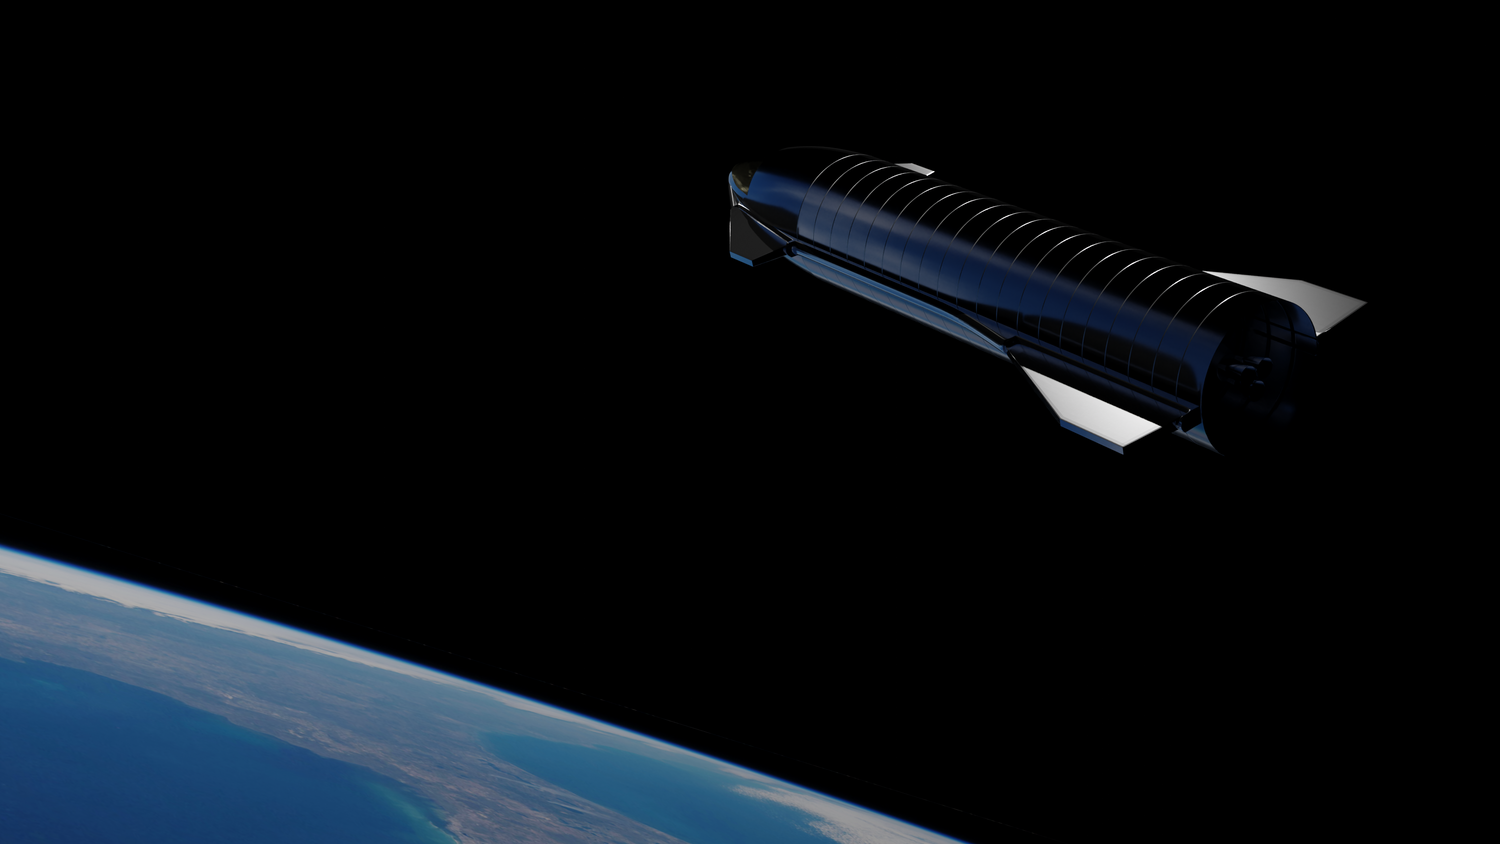 SpaceX aims to conduct the first orbital Starship test flight in 2021